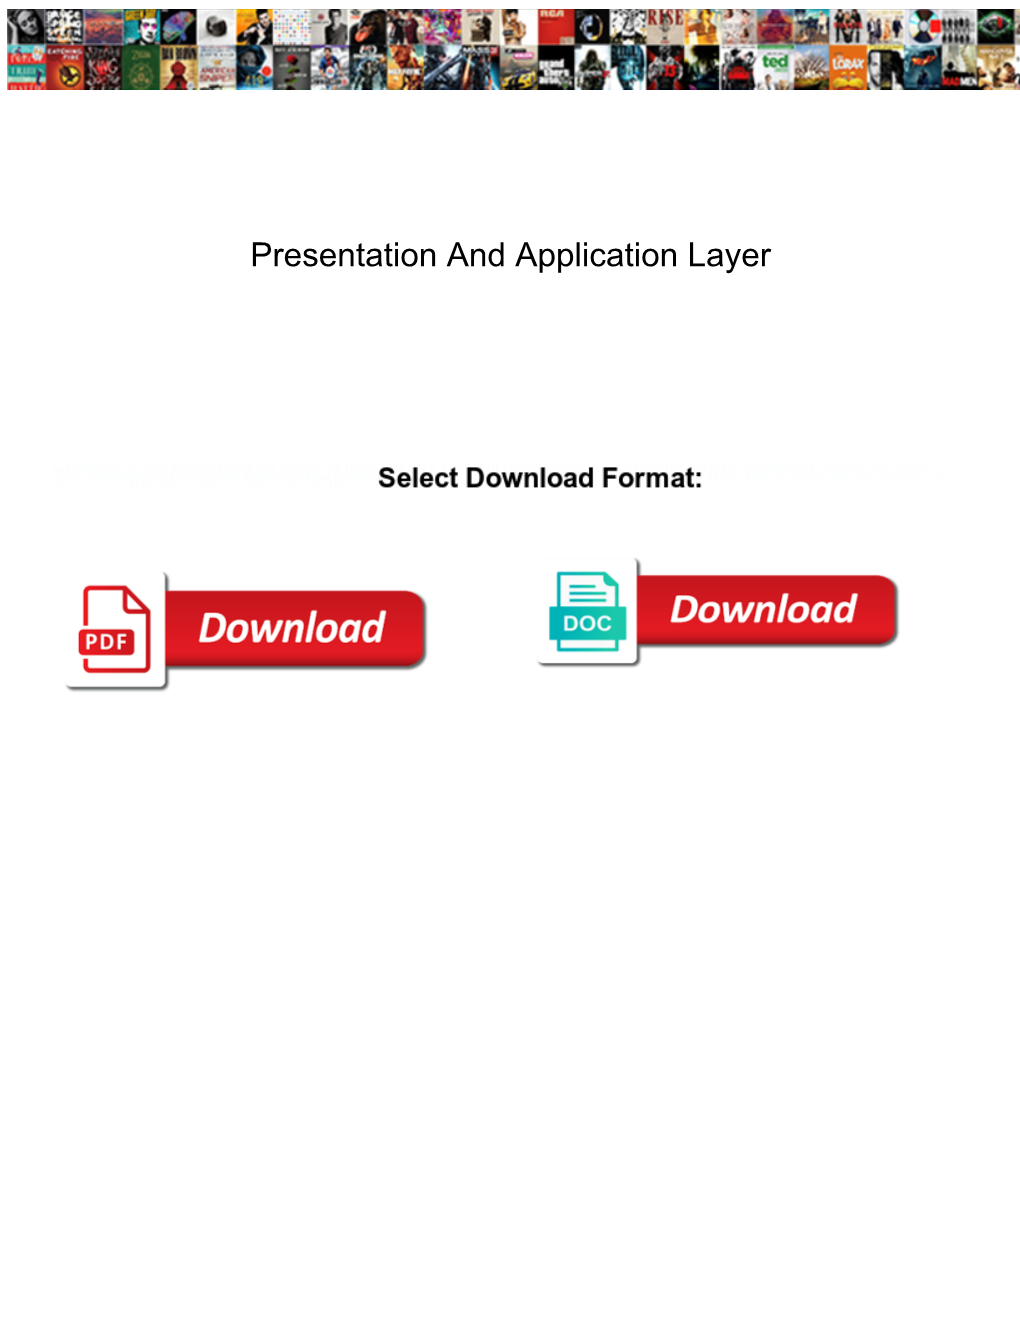 Presentation and Application Layer